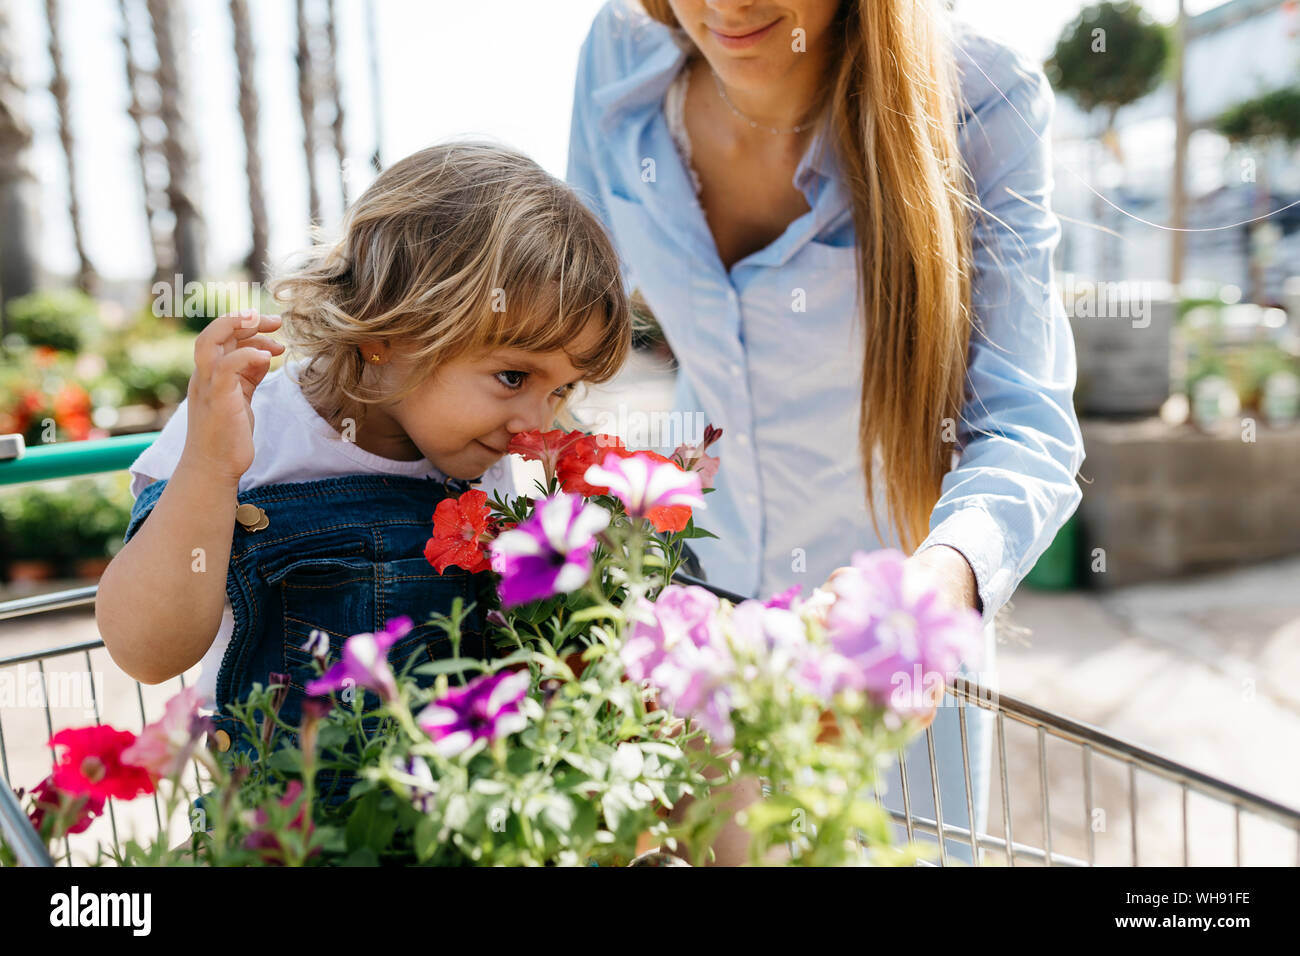 Girl in shopping cart in a garden center smelling at flower Stock Photo